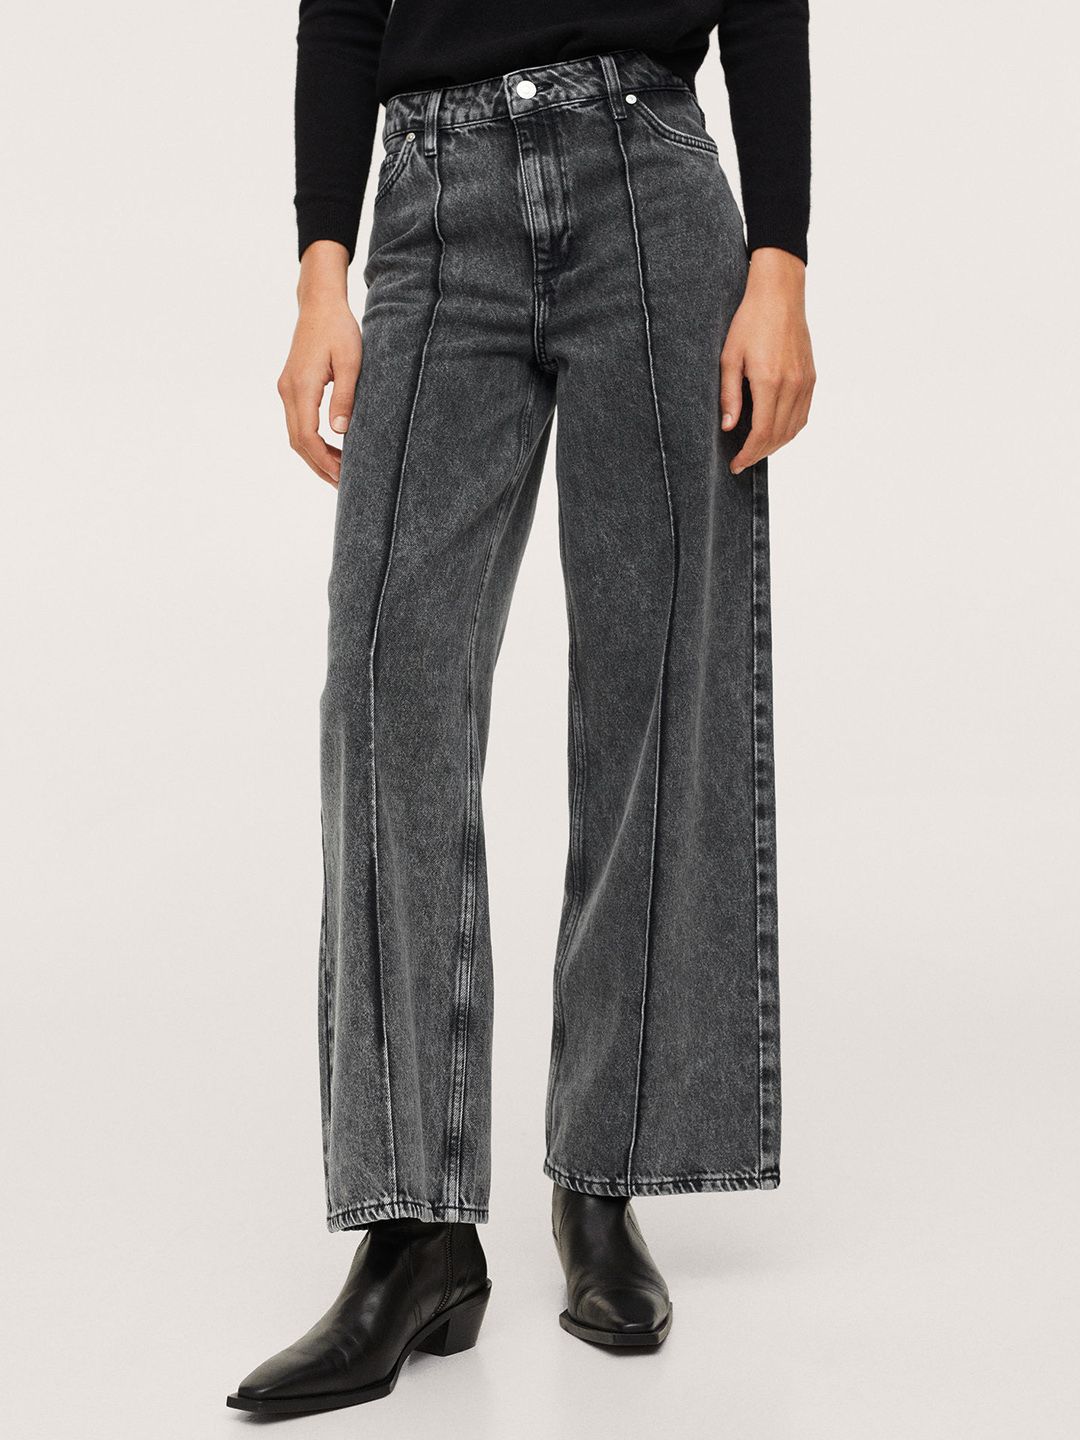 MANGO Women Charcoal Wide Leg High-Rise Jeans Price in India